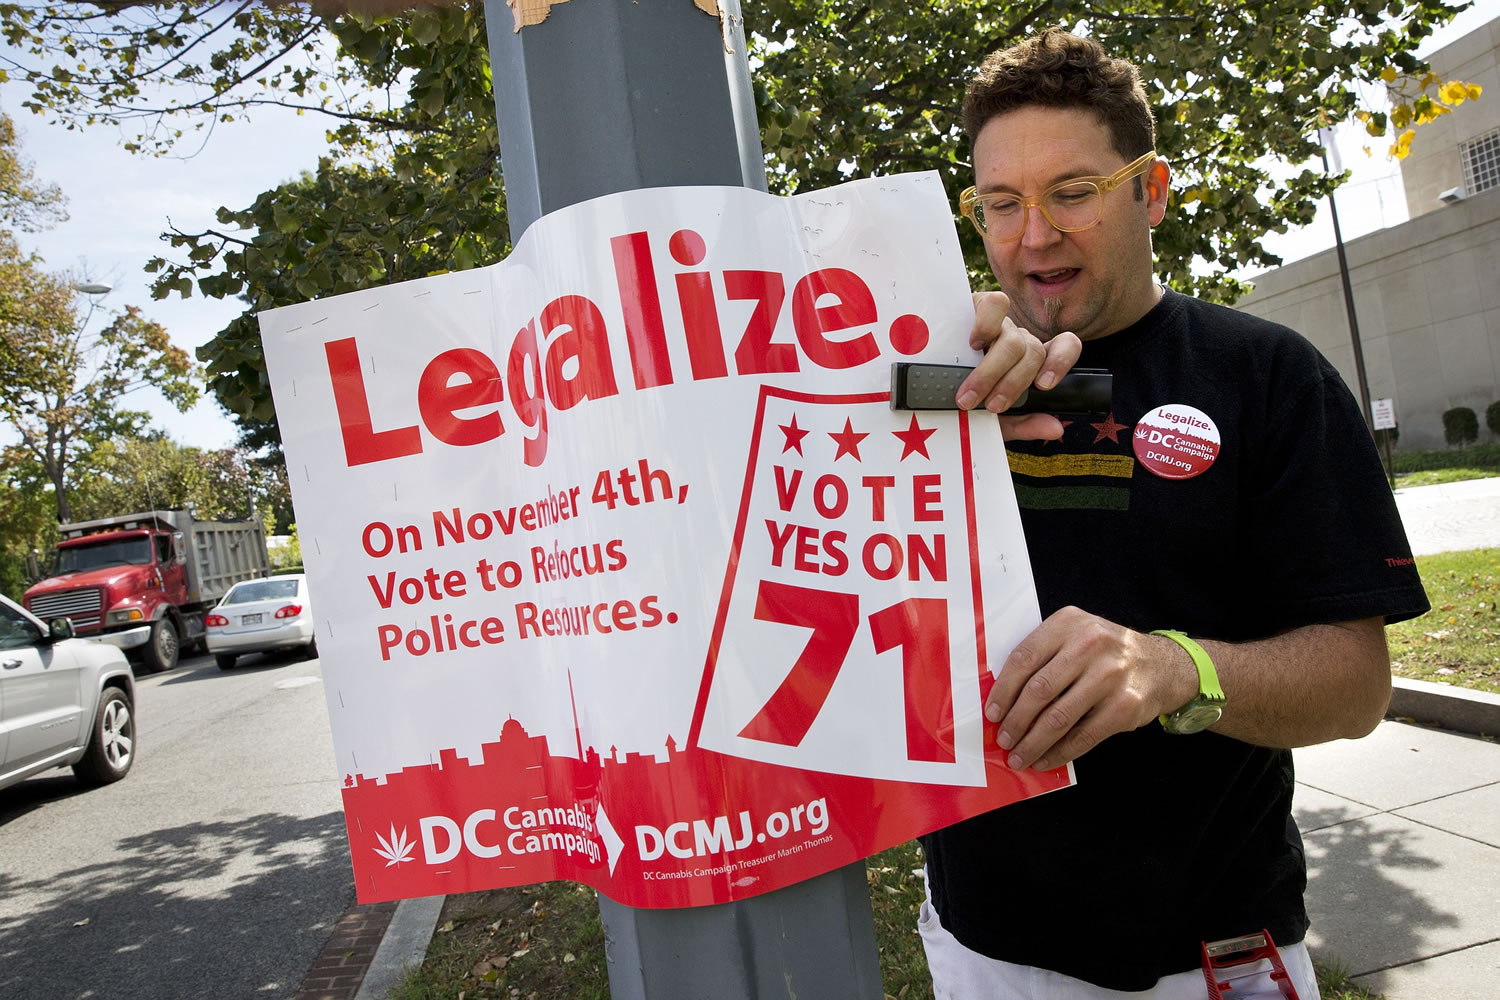 Adam Eidinger, chairman of the DC Cannabis Campaign, puts up posters encouraging people to vote yes on DC Ballot Initiative 71 to legalize small amounts of marijuana for personal use in Washington.